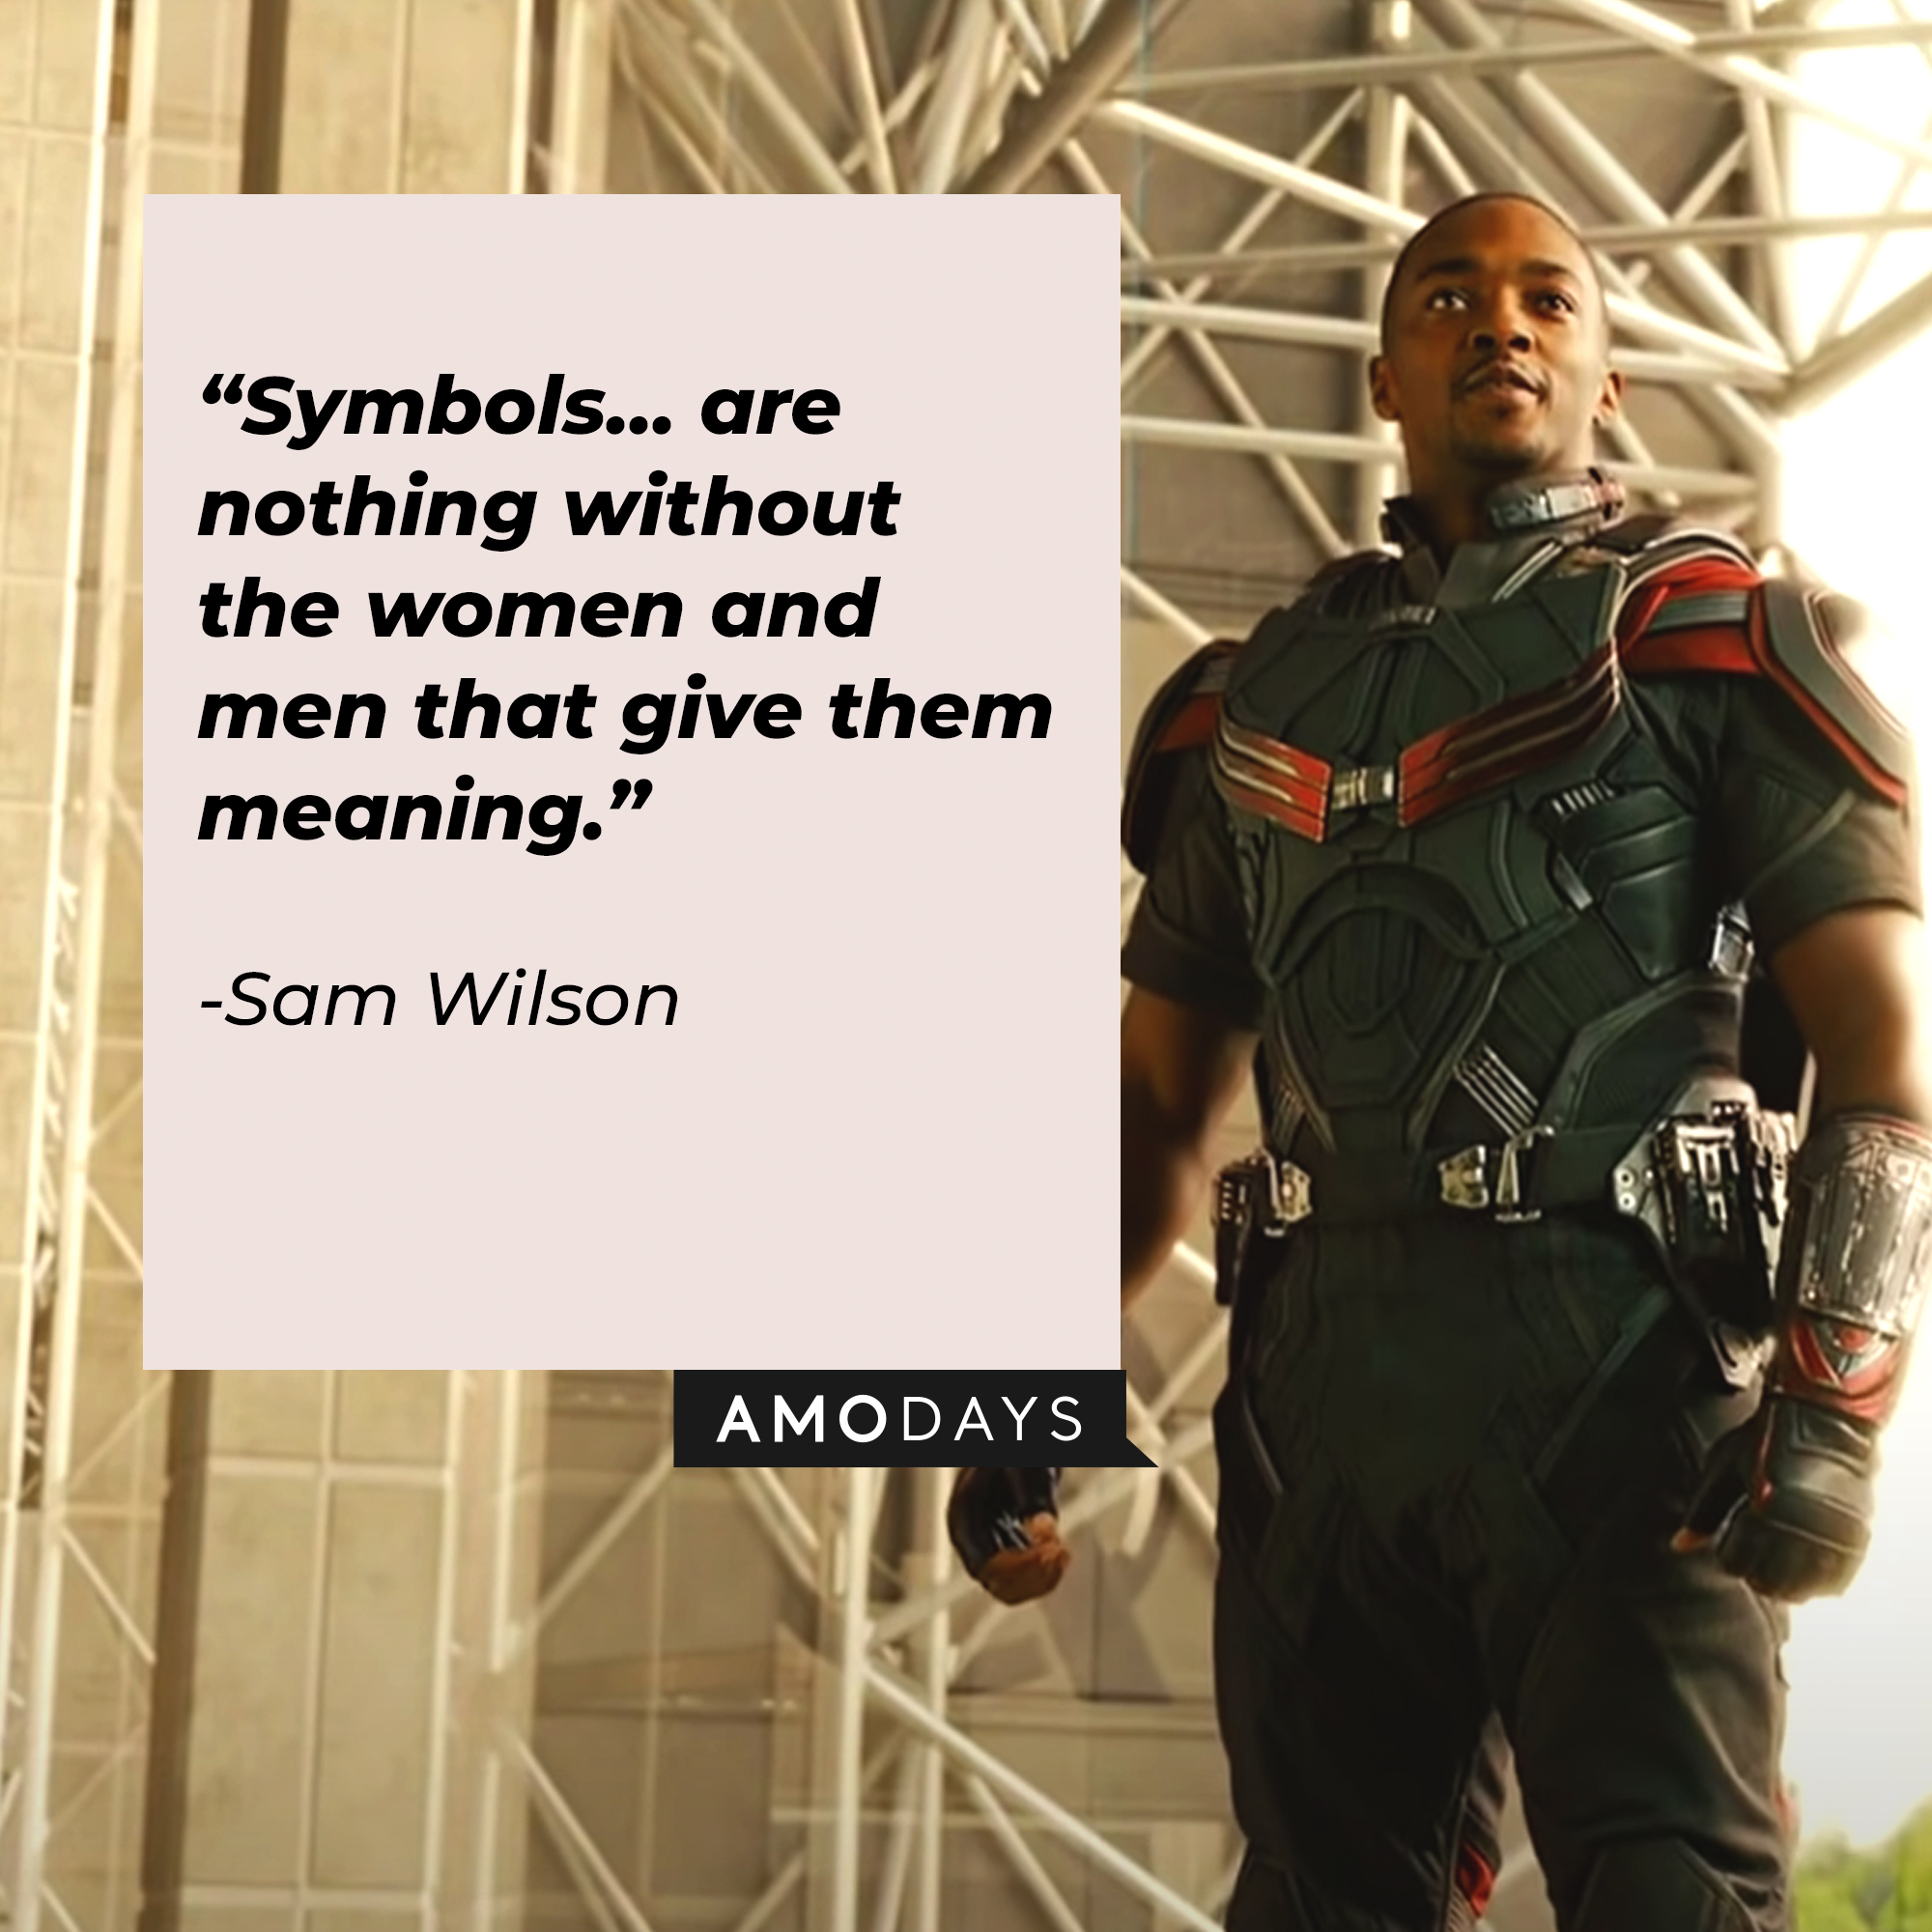 Sam Wilson, with his quote: “Symbols… are nothing without the women and men that give them meaning.” | Source: Youtube.com/marvel